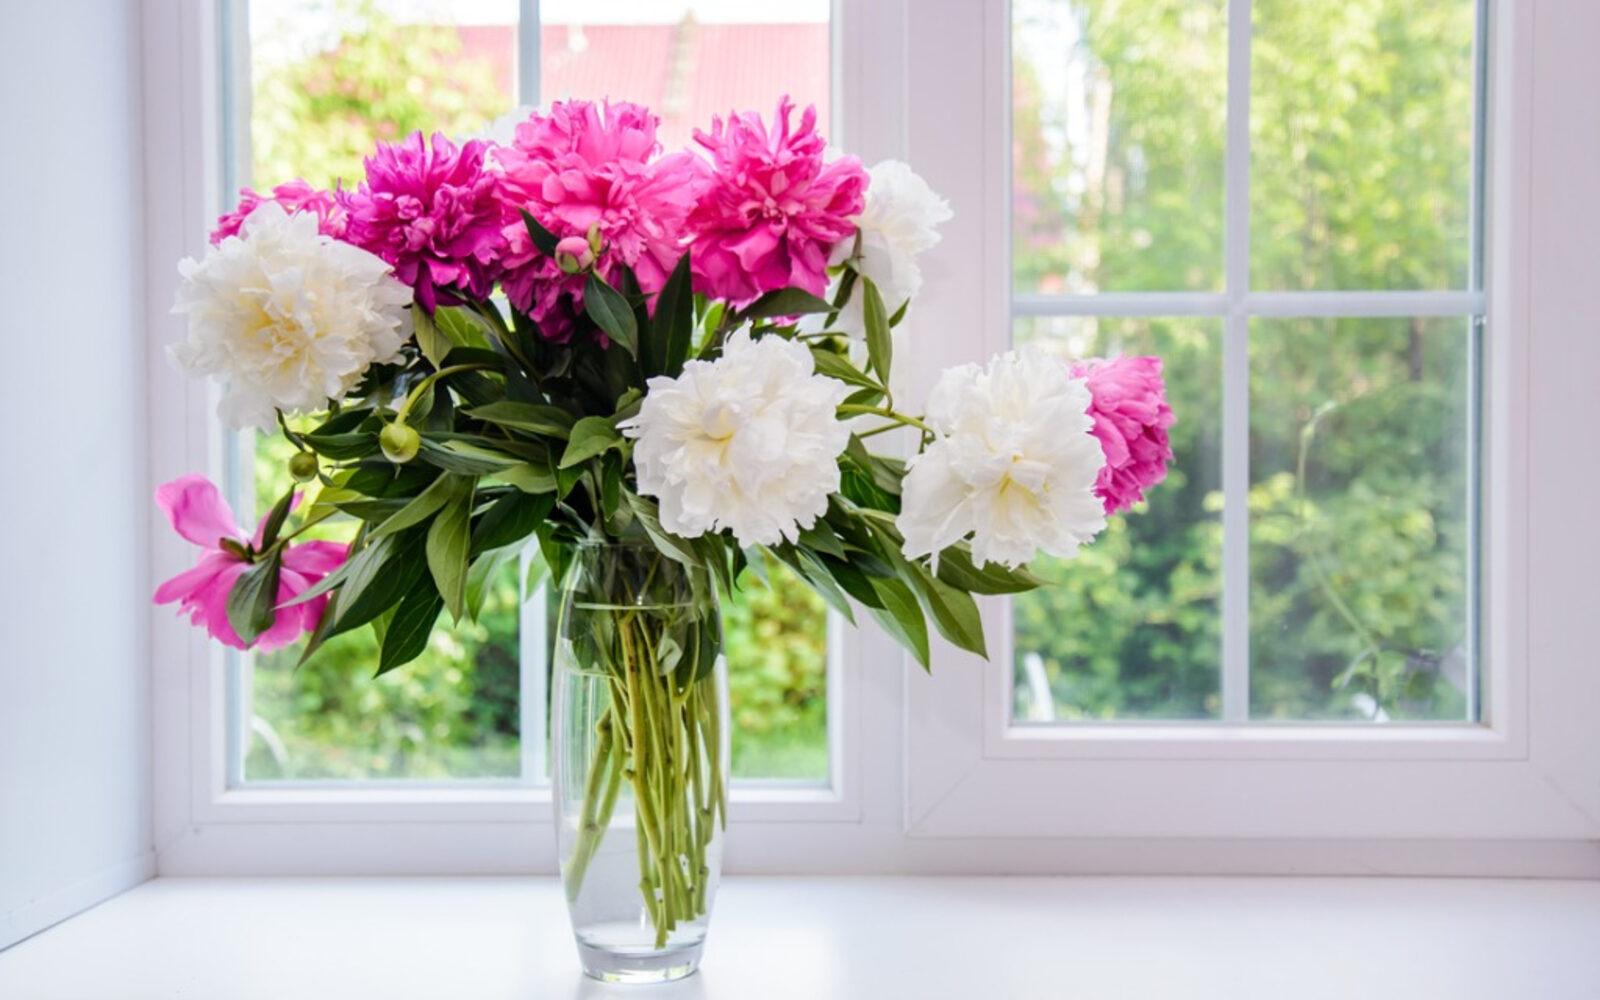 How Long Can Flowers Last Without a Vase?